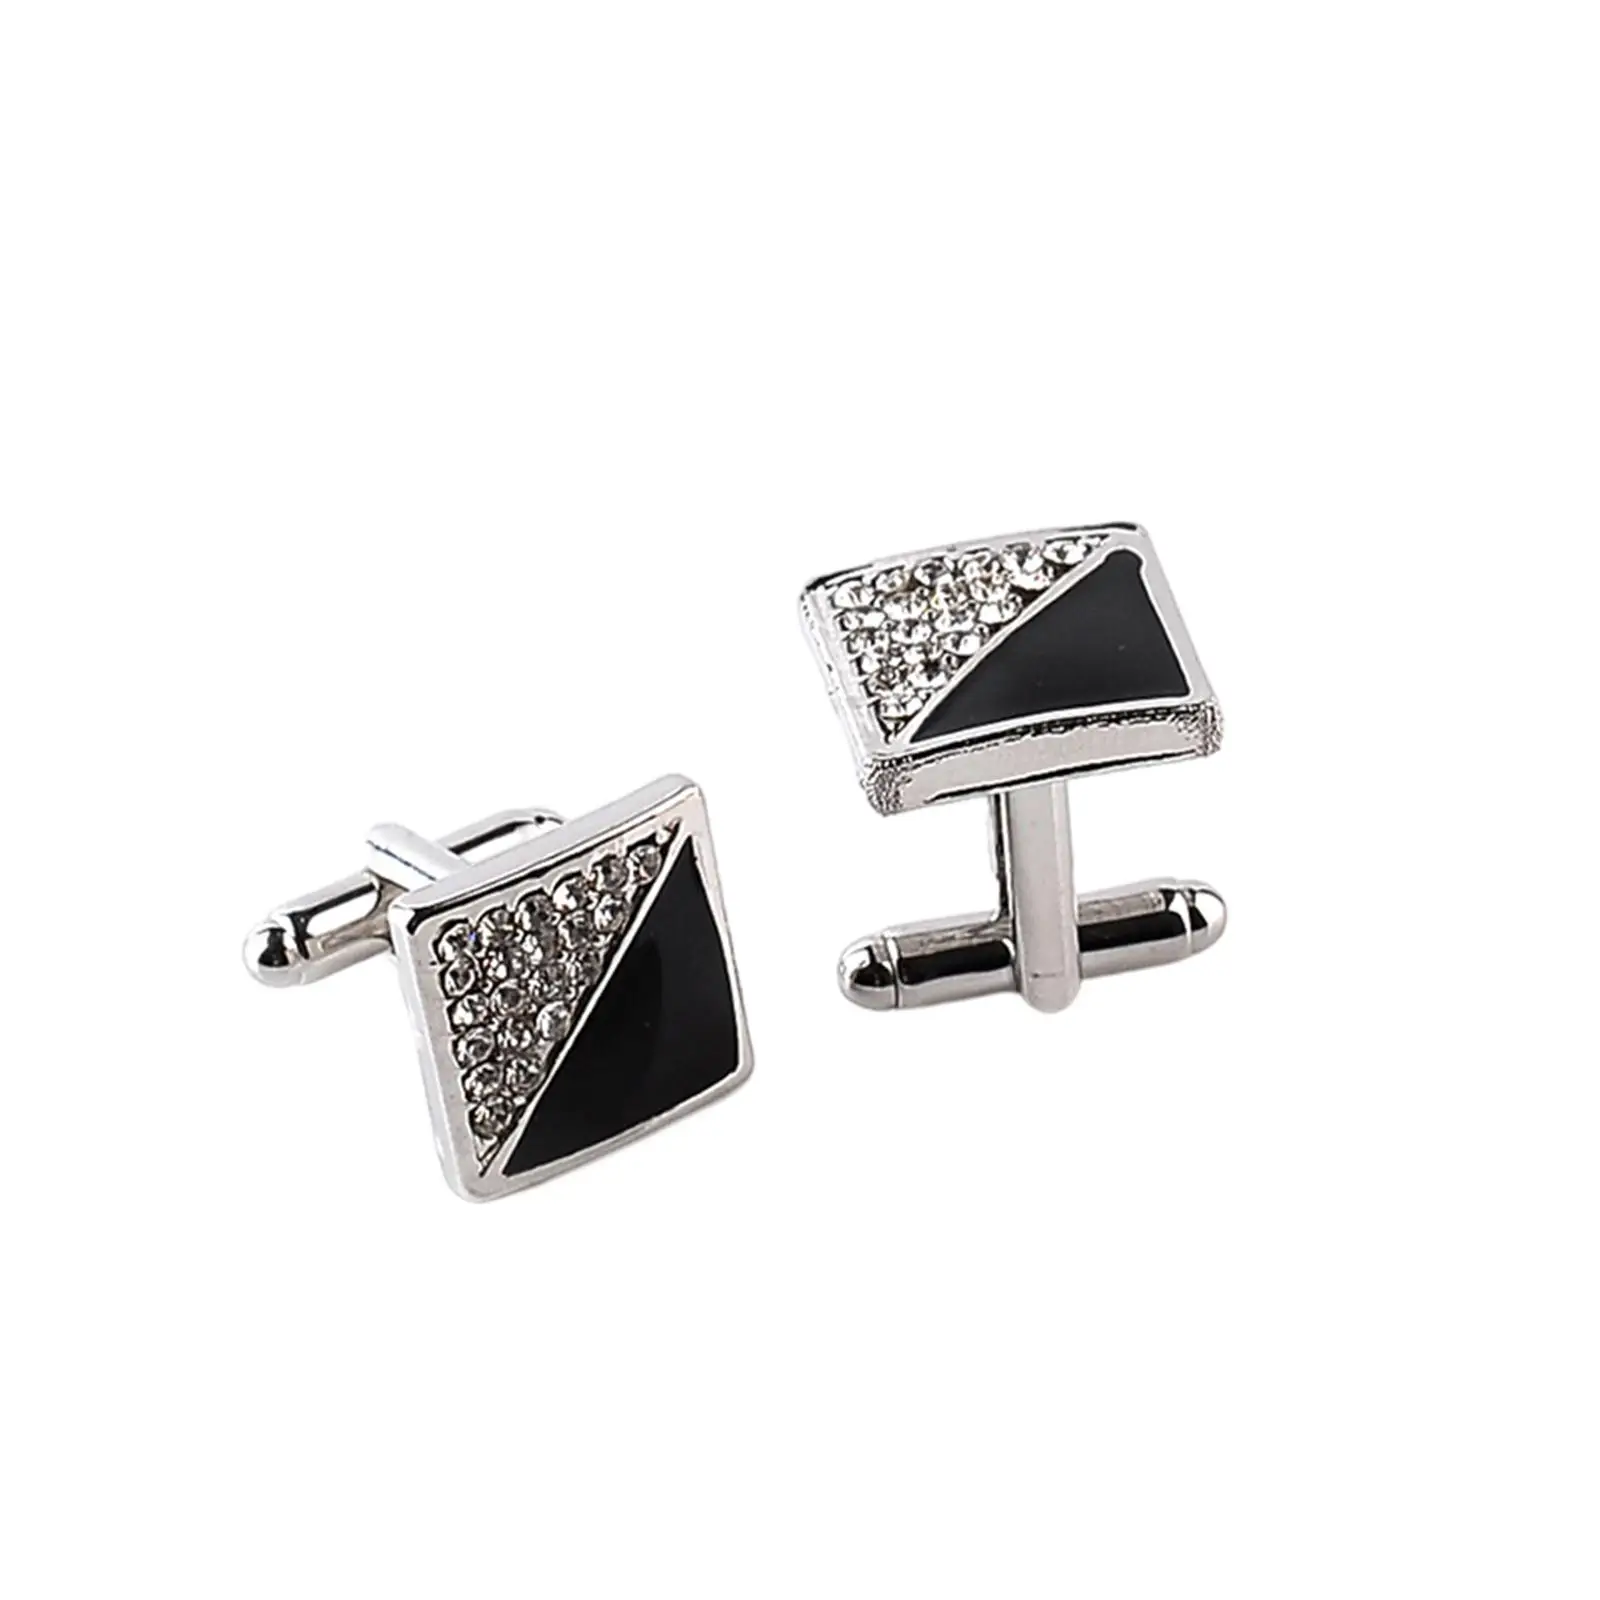 2Pcs Mens Cufflinks Rhinestones Unique Square Elegant Alloy Shirts  for Birthday Business Special Occasions Office Favour Gift